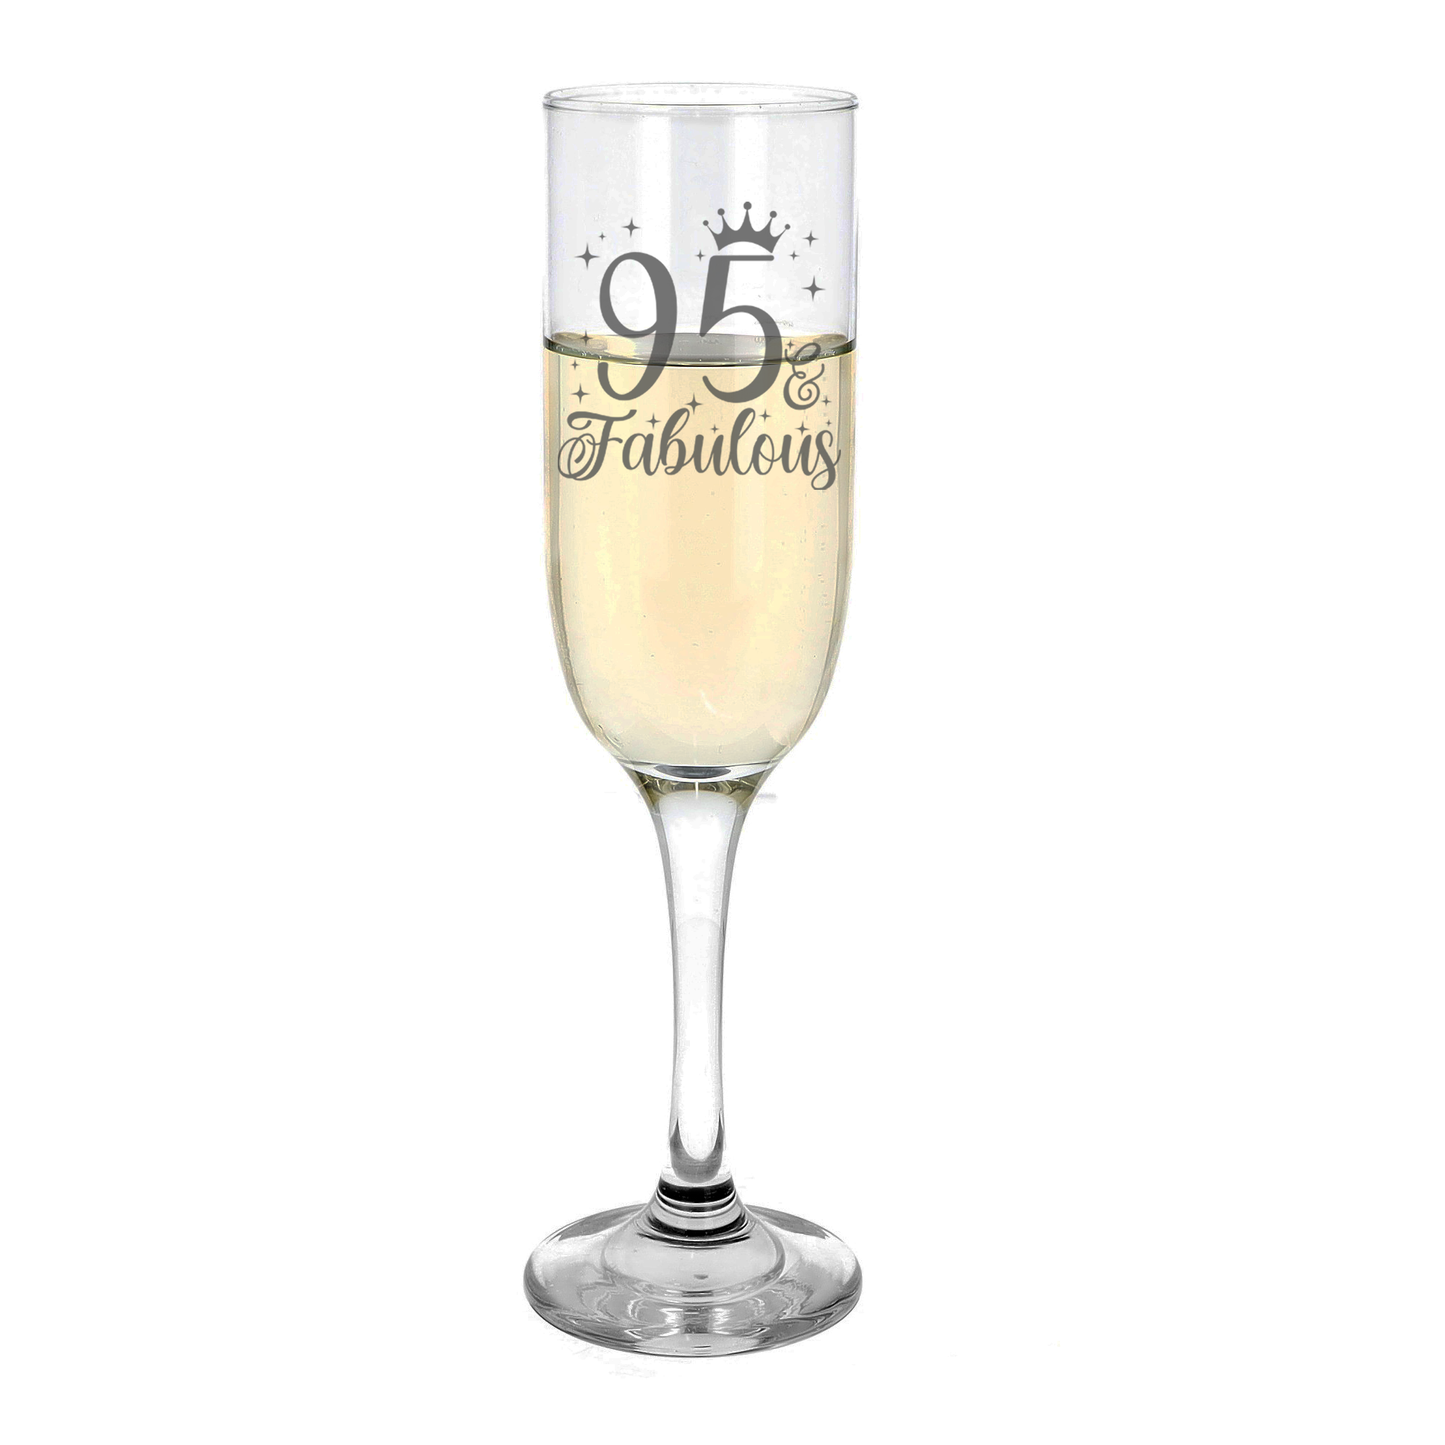 95 & Fabulous Engraved Champagne Glass and/or Coaster Set  - Always Looking Good -   